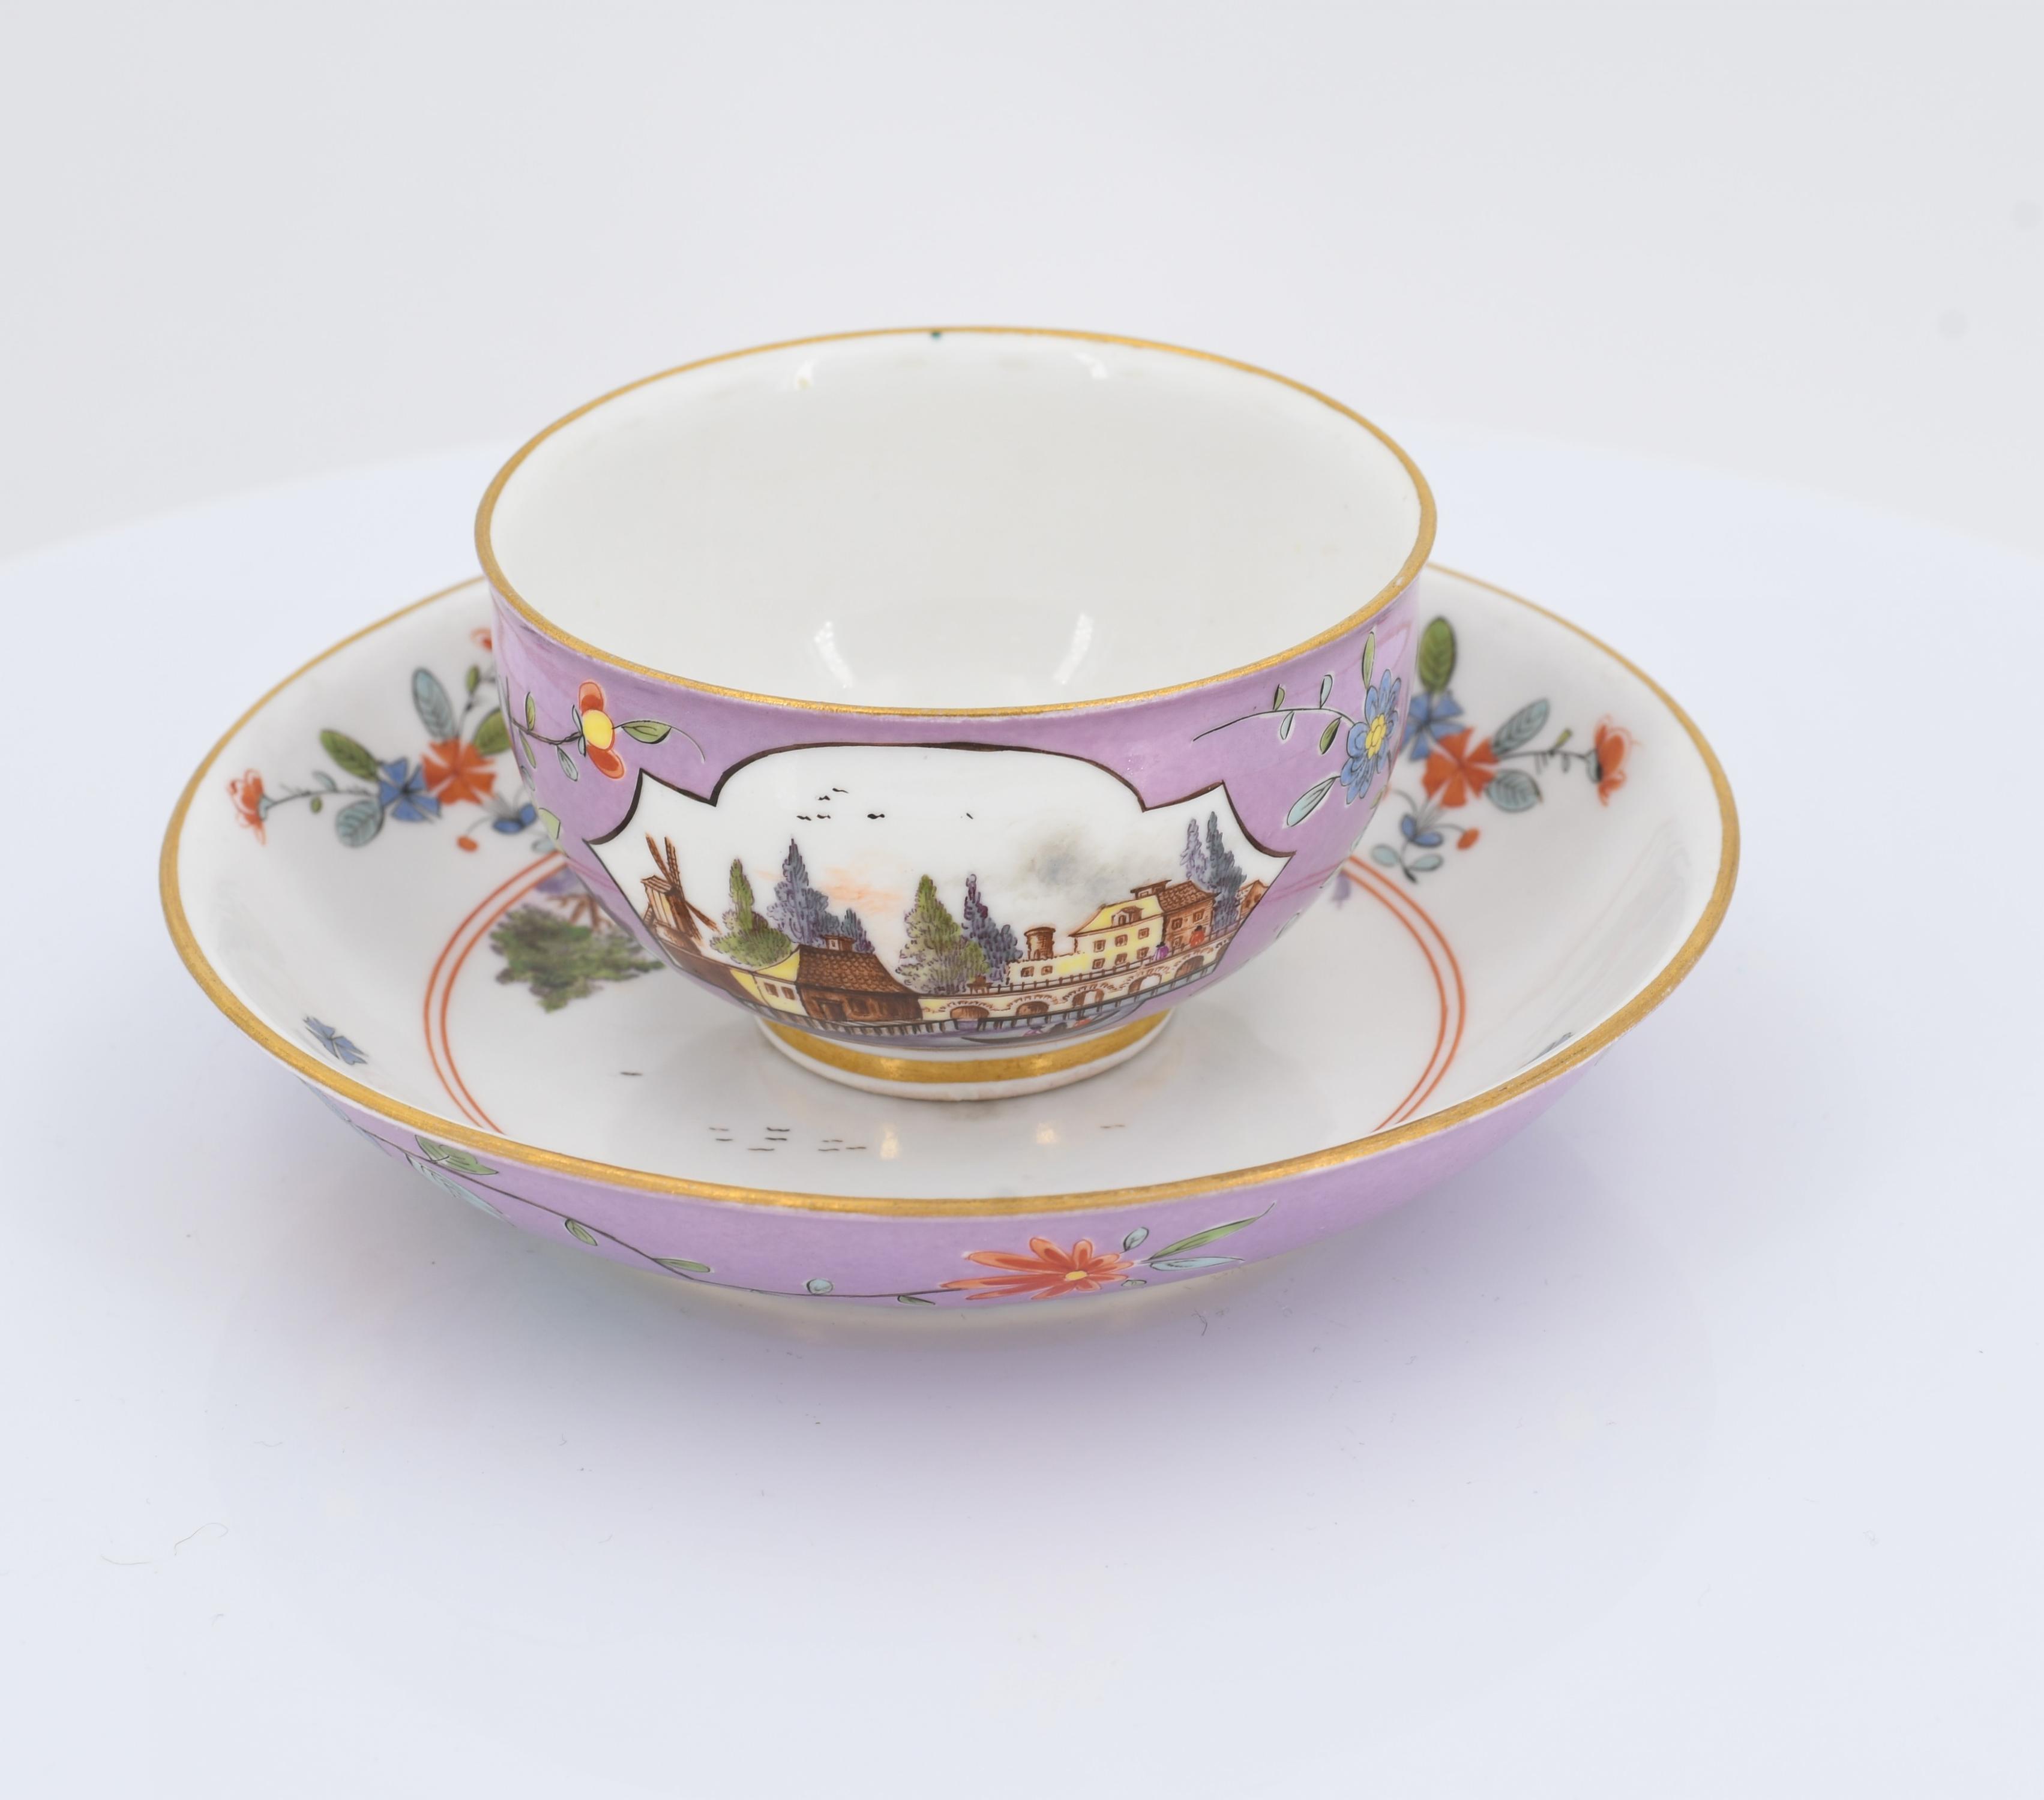 Tea bowl and saucer with merchant navy scenes - Image 4 of 7